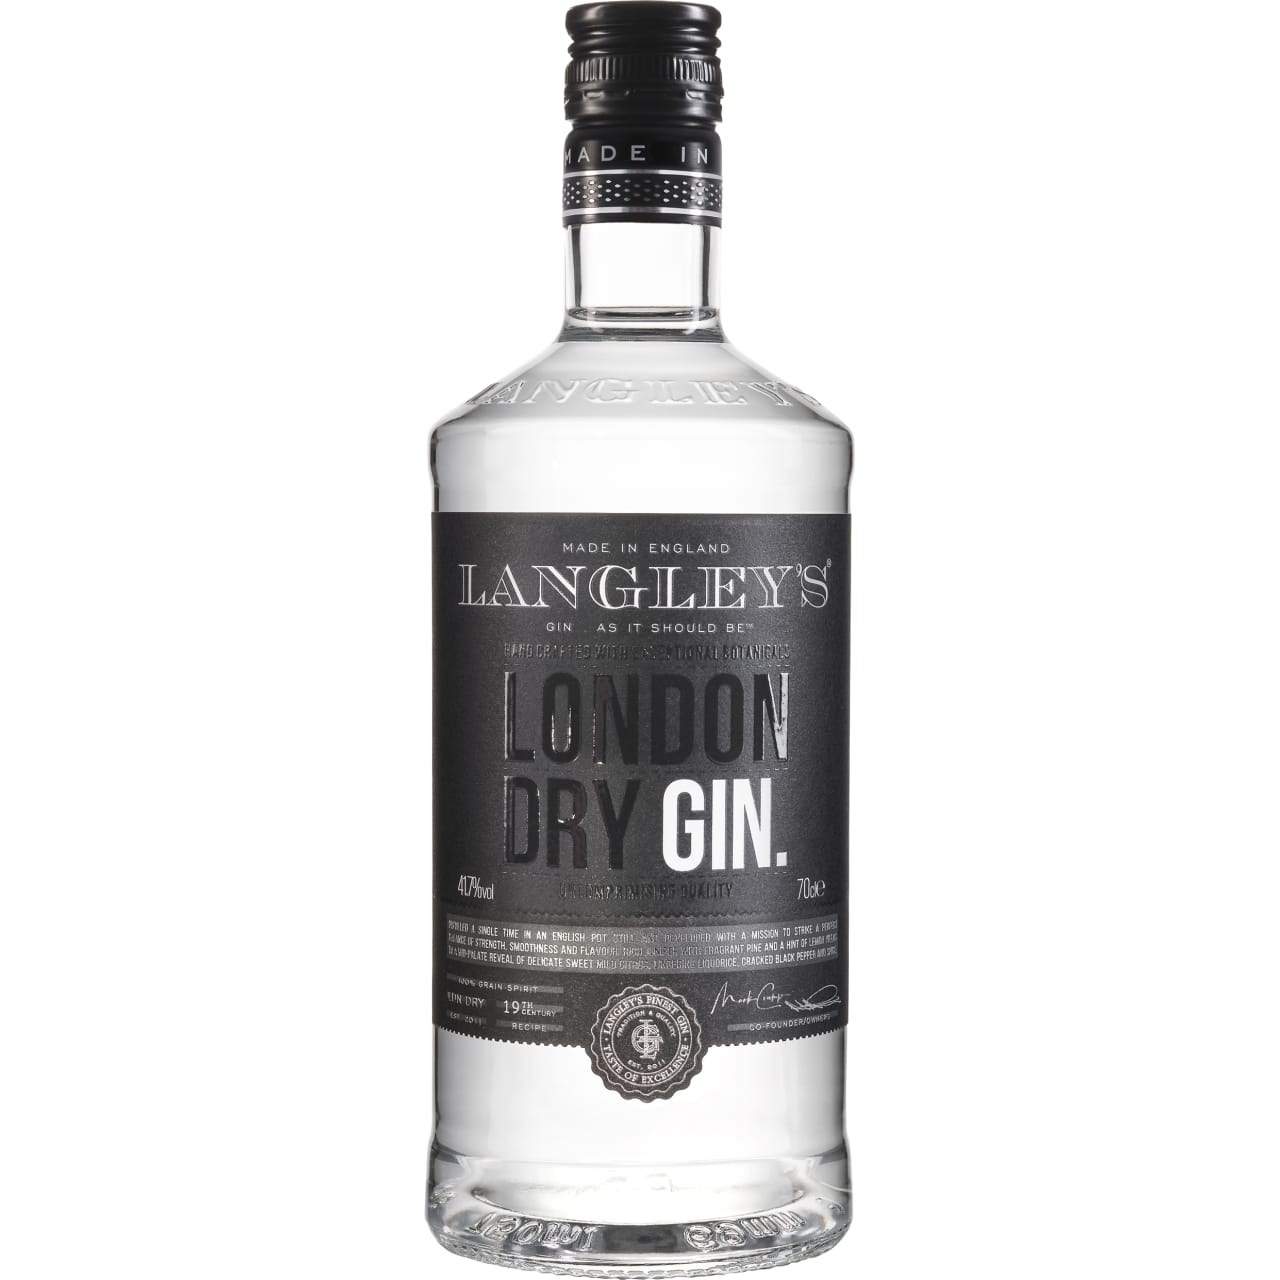 Initial strong notes of juniper and coriander are followed by the sweetness and zing of citrus.